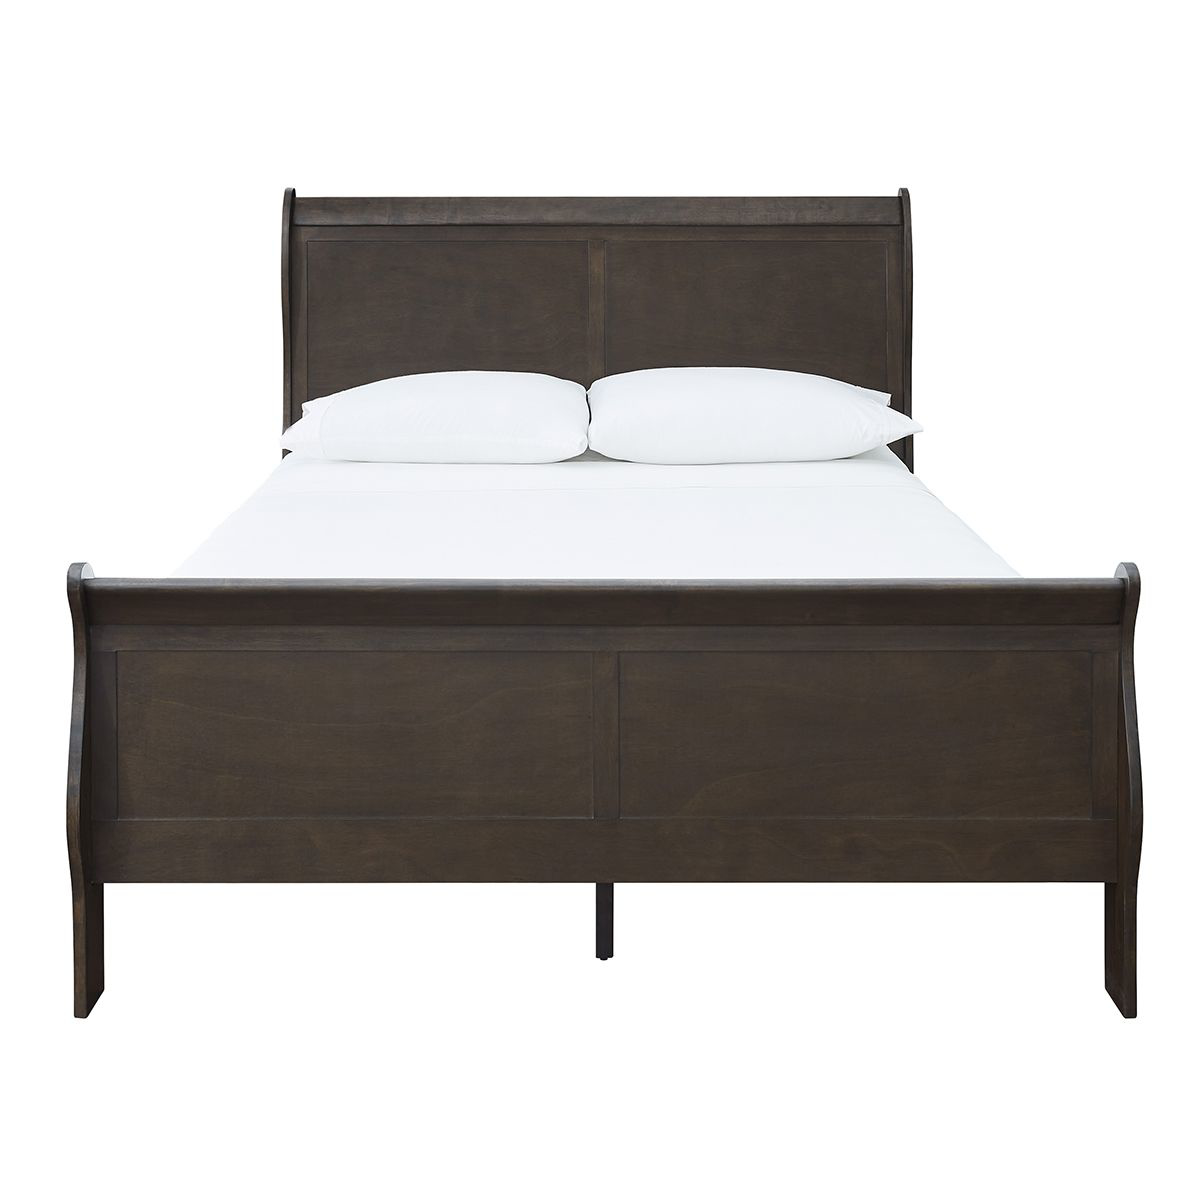 Picture of LOUIS SLEIGH FULL BED IN BROWN